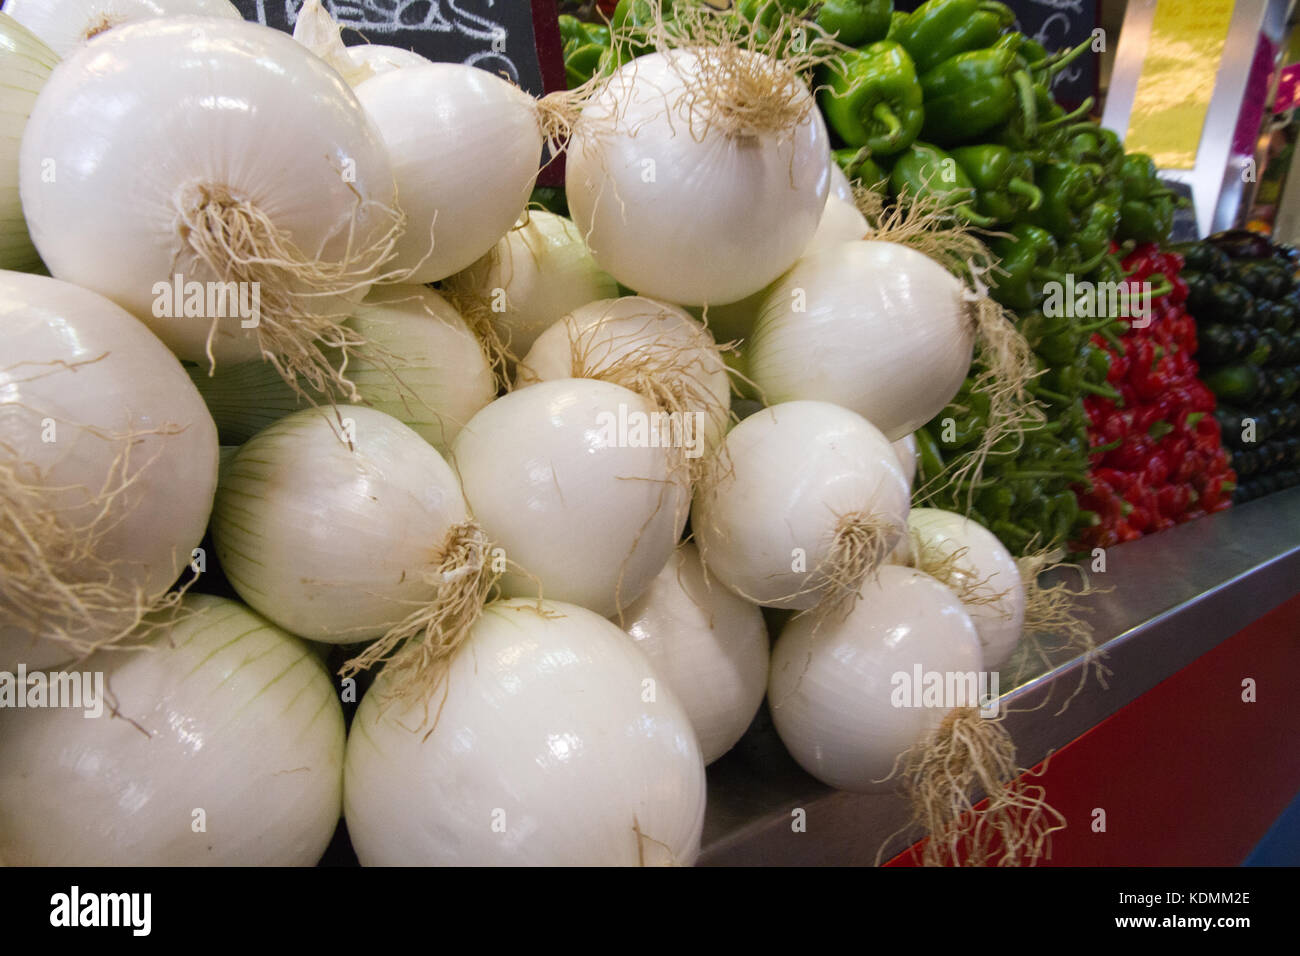 Malaga market, white onions showed for sale in a stall Stock Photo